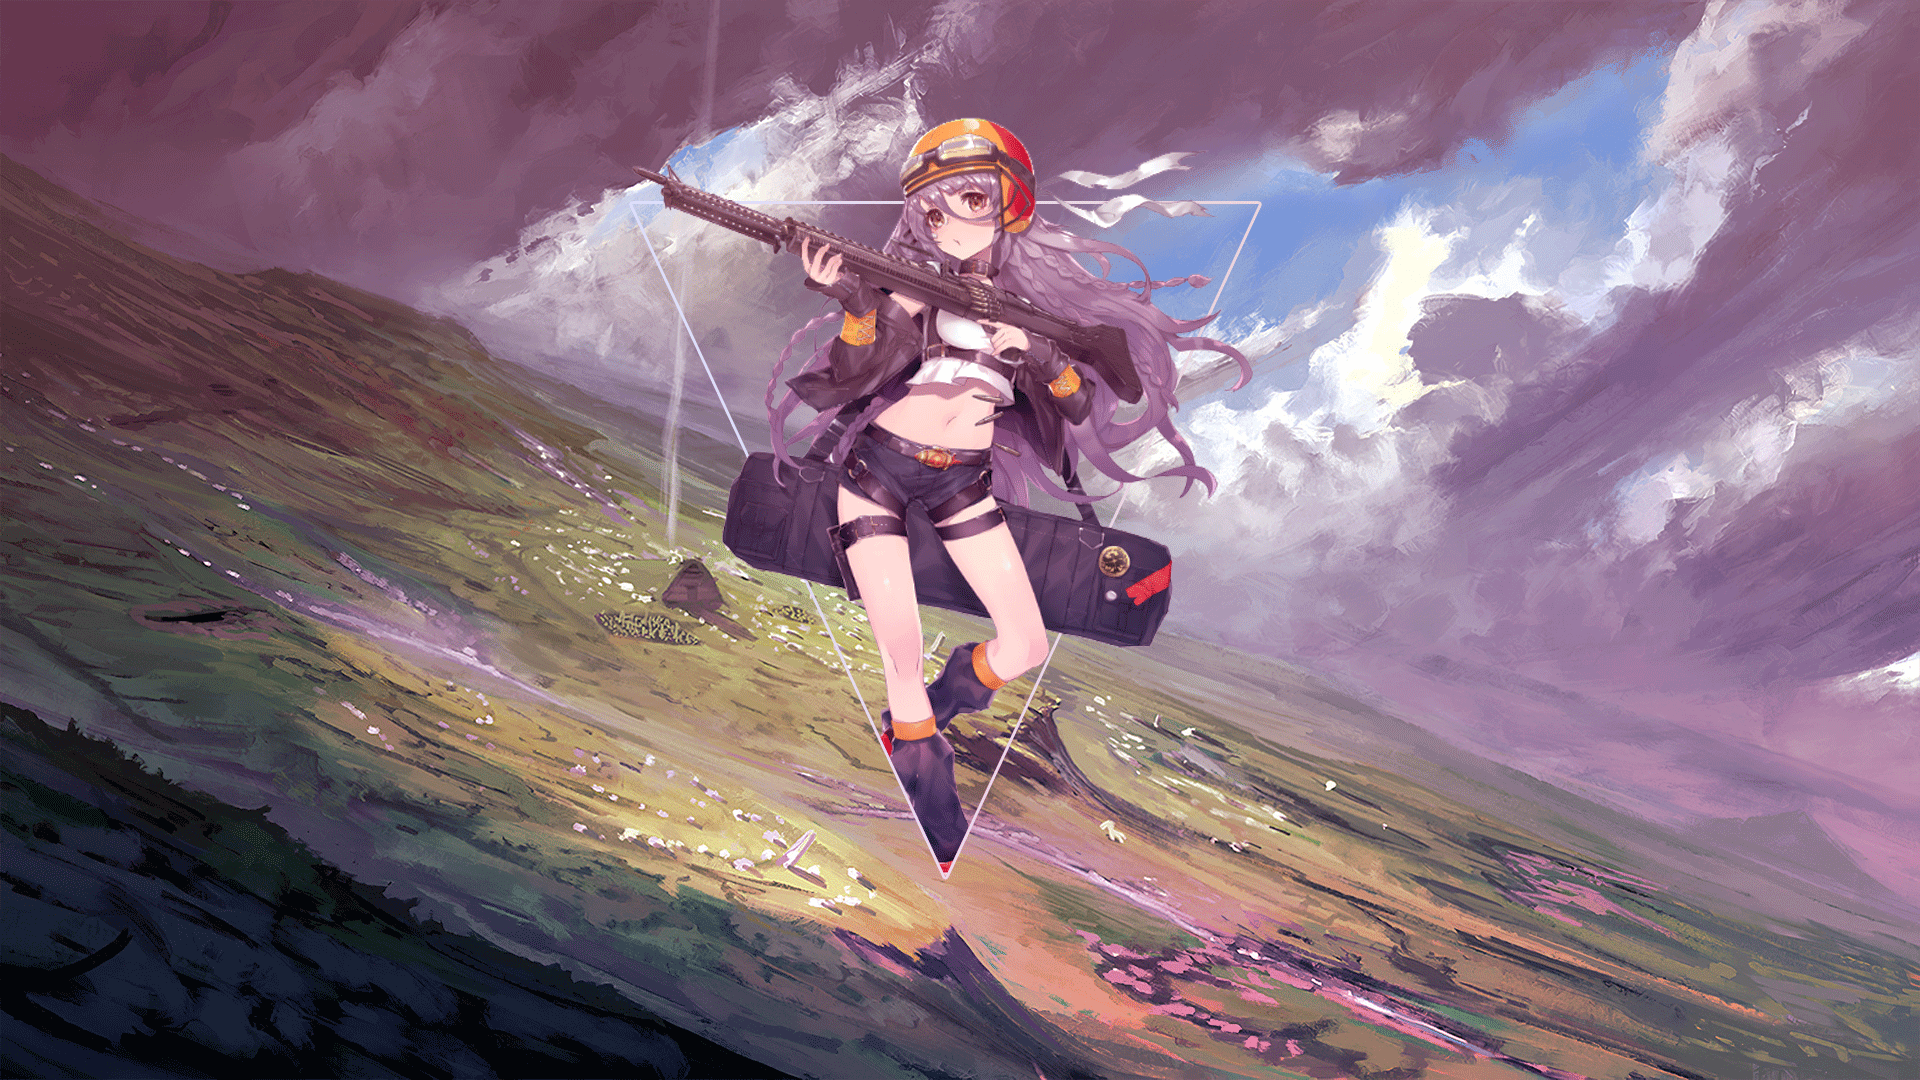 Anime Anime Girls Photoshop Digital Art Picture In Picture Abstract Landscape Triangle Sky Helmet Na 1920x1080